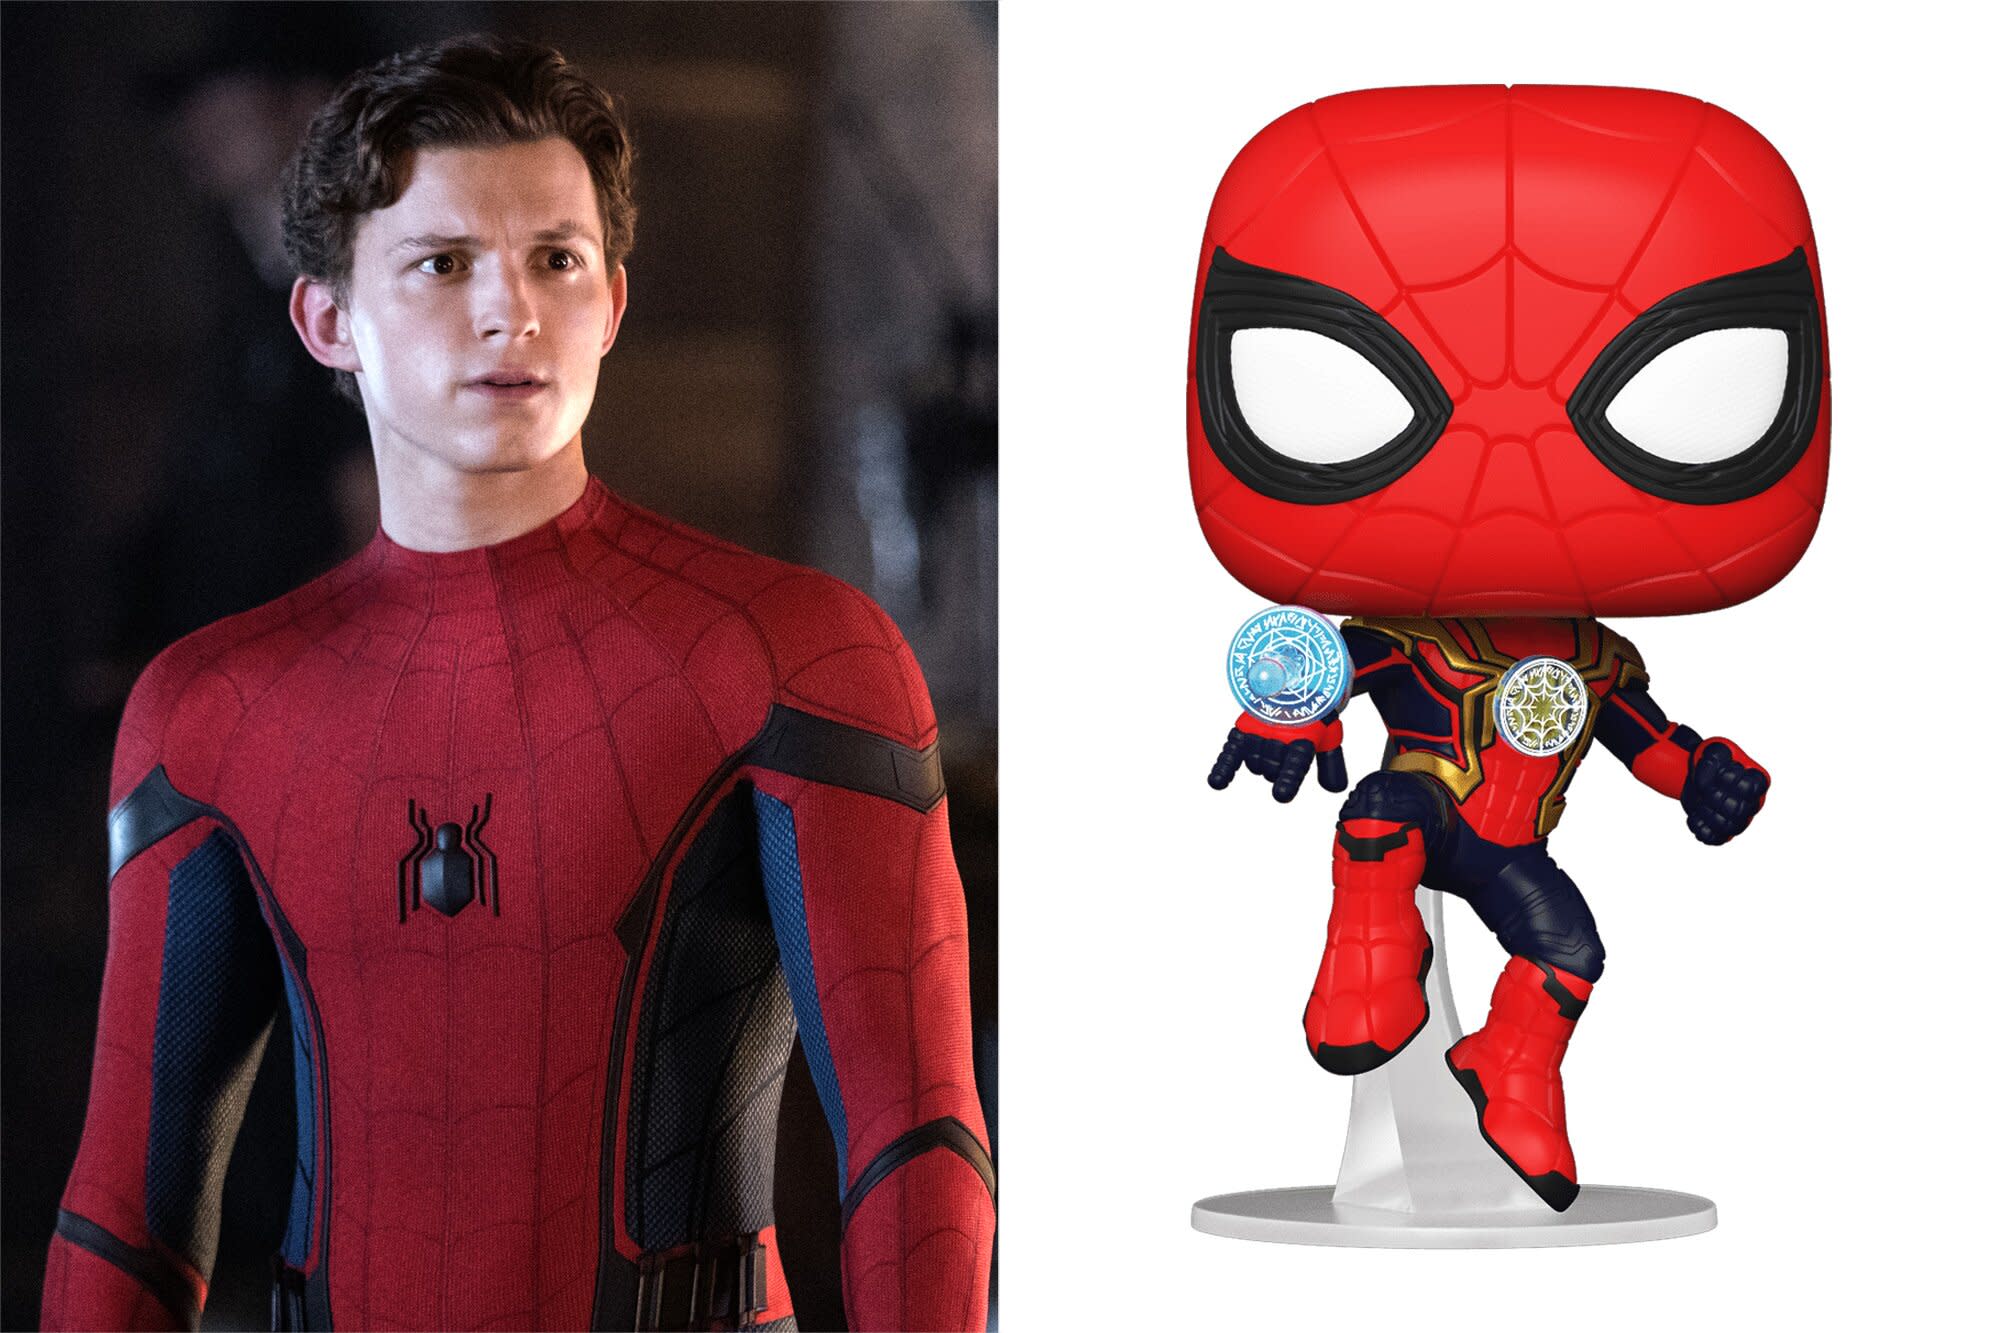 Tom Holland S Spider Man Gets A Doctor Strange Upgrade In New No Way Home Toys - how to look like spiderman in roblox